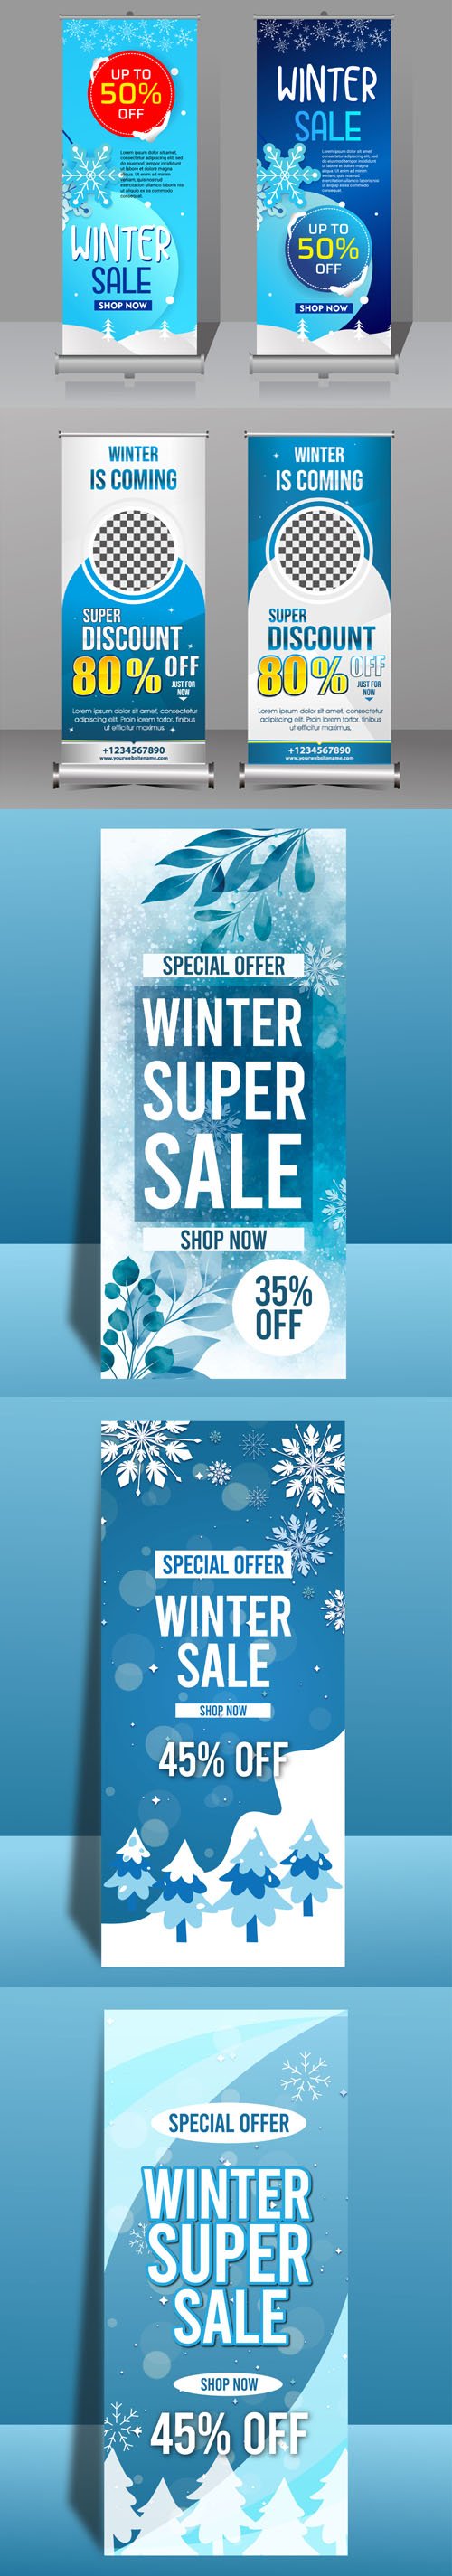 7 Winter Sale Roll-up Banners Vector Templates